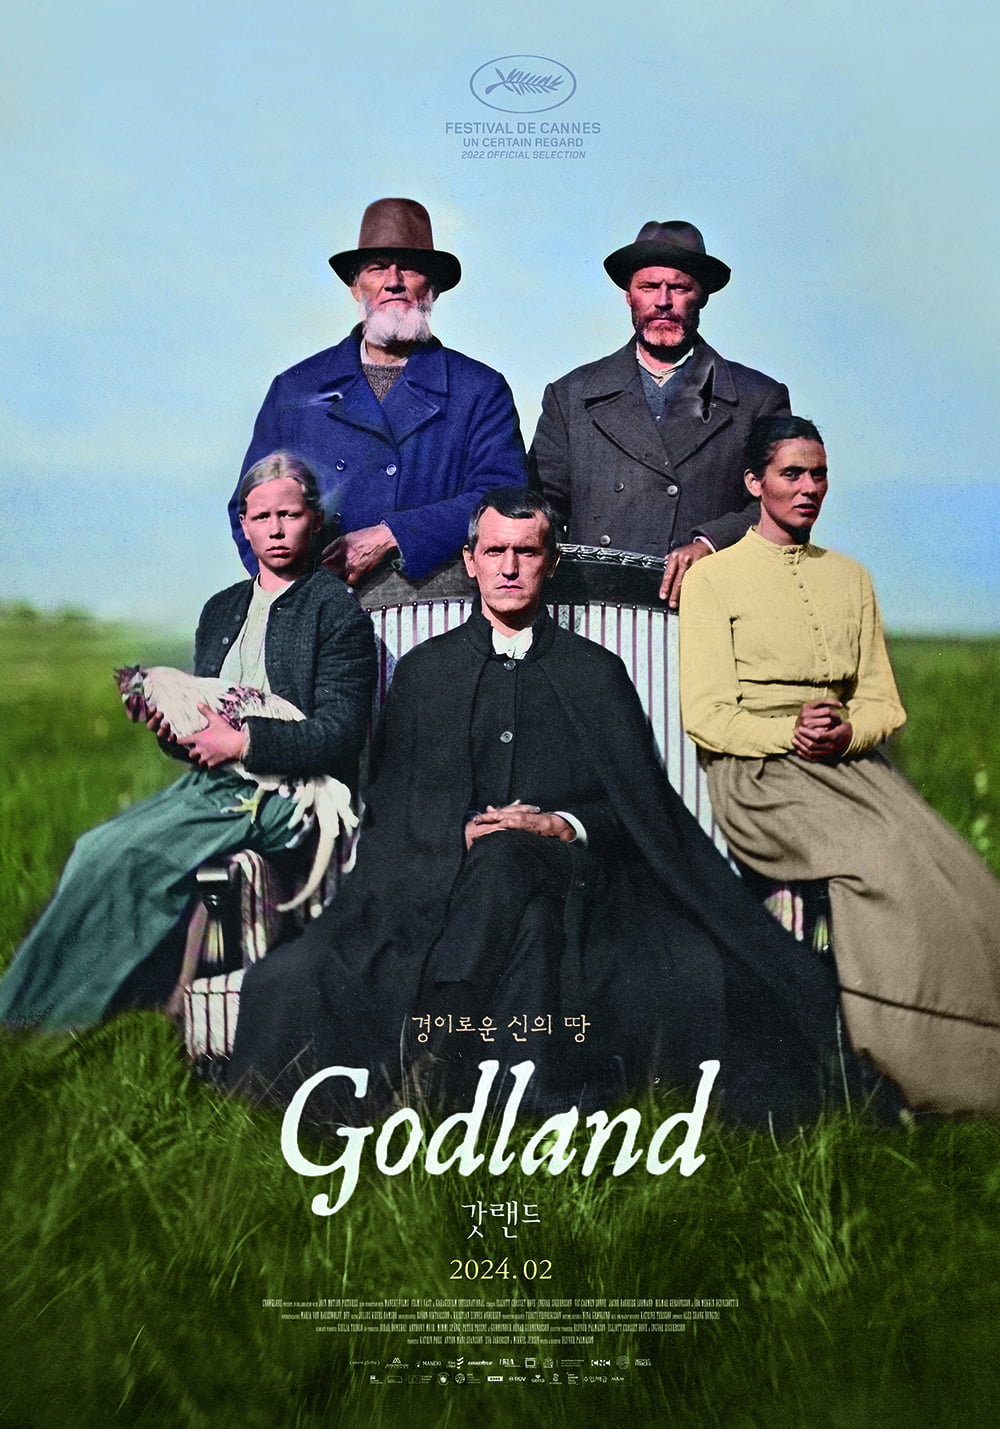 Director Hollynur Palmasson's film 'Godland' to be released in Korea in February